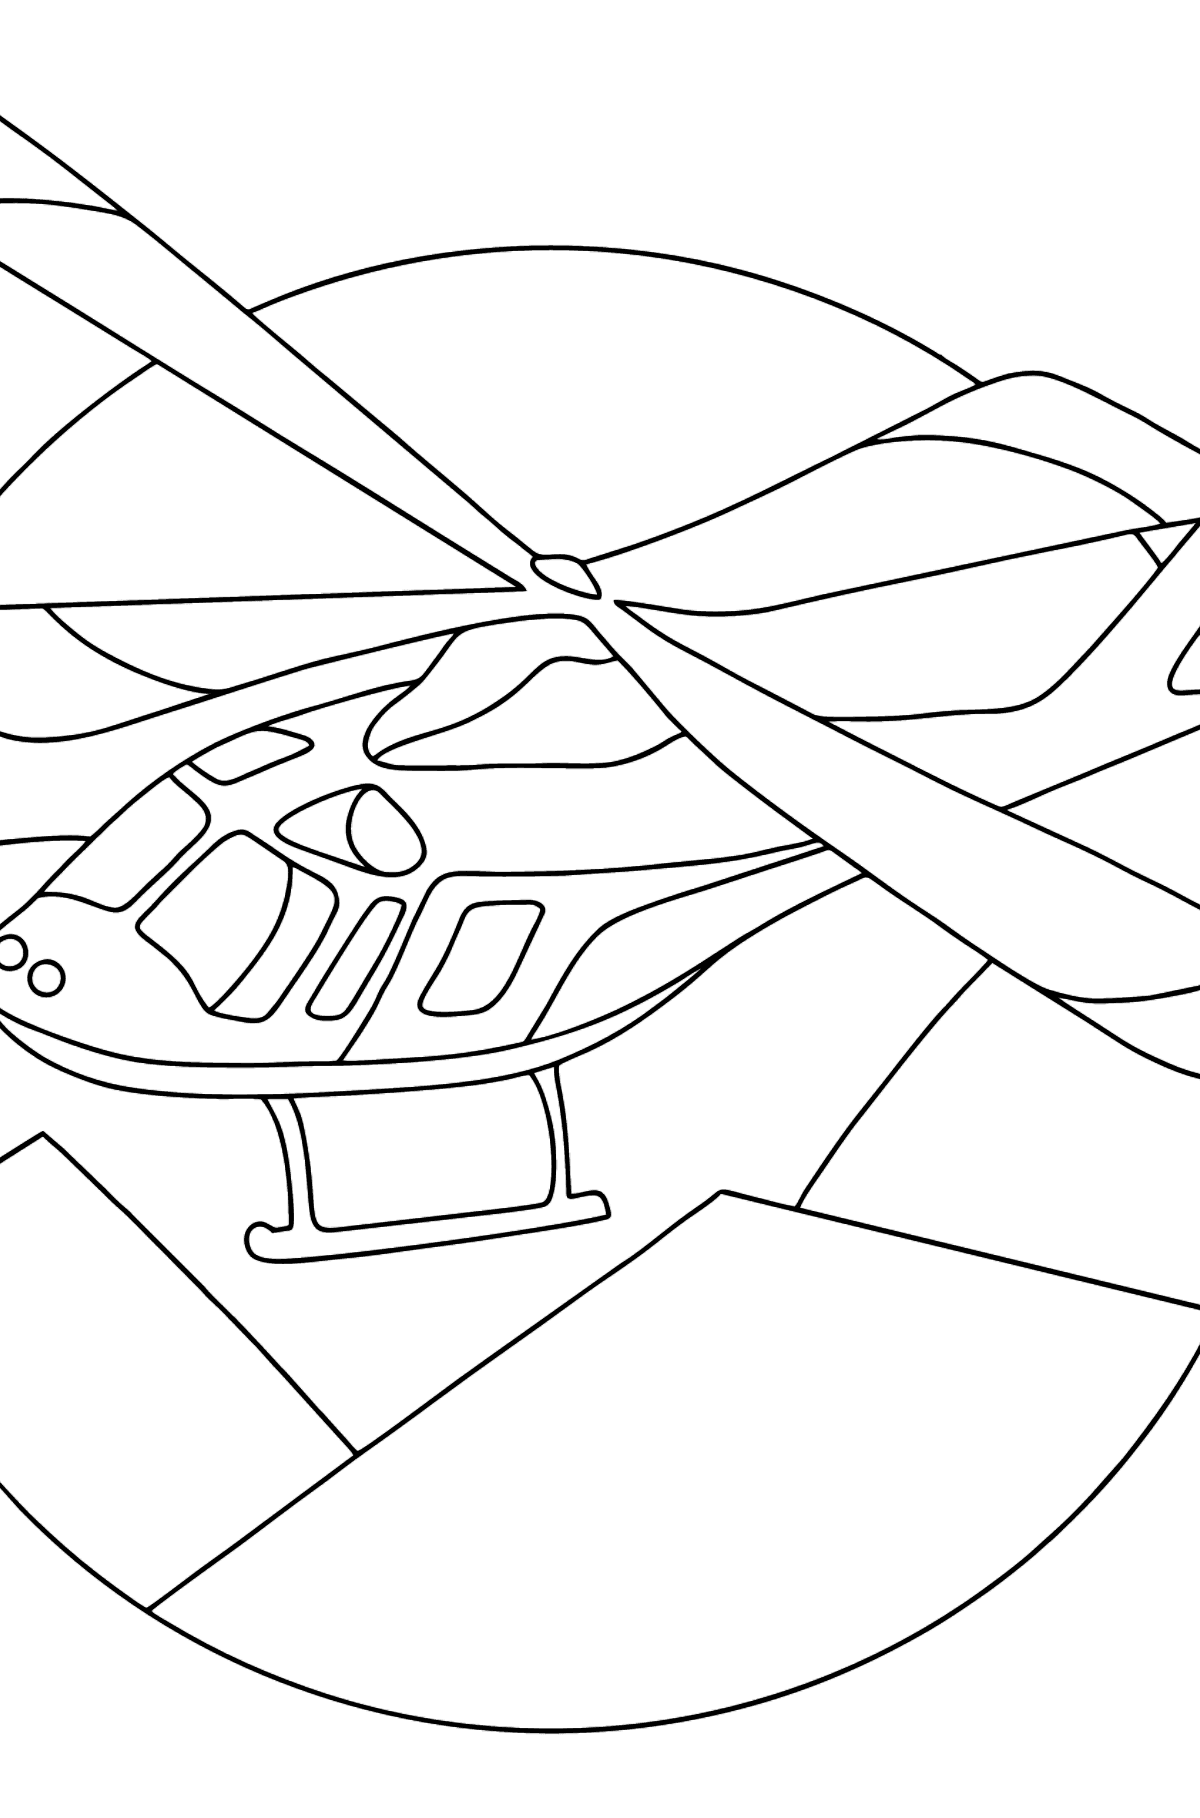 Coloring Page - A Sport Helicopter - Coloring Pages for Kids